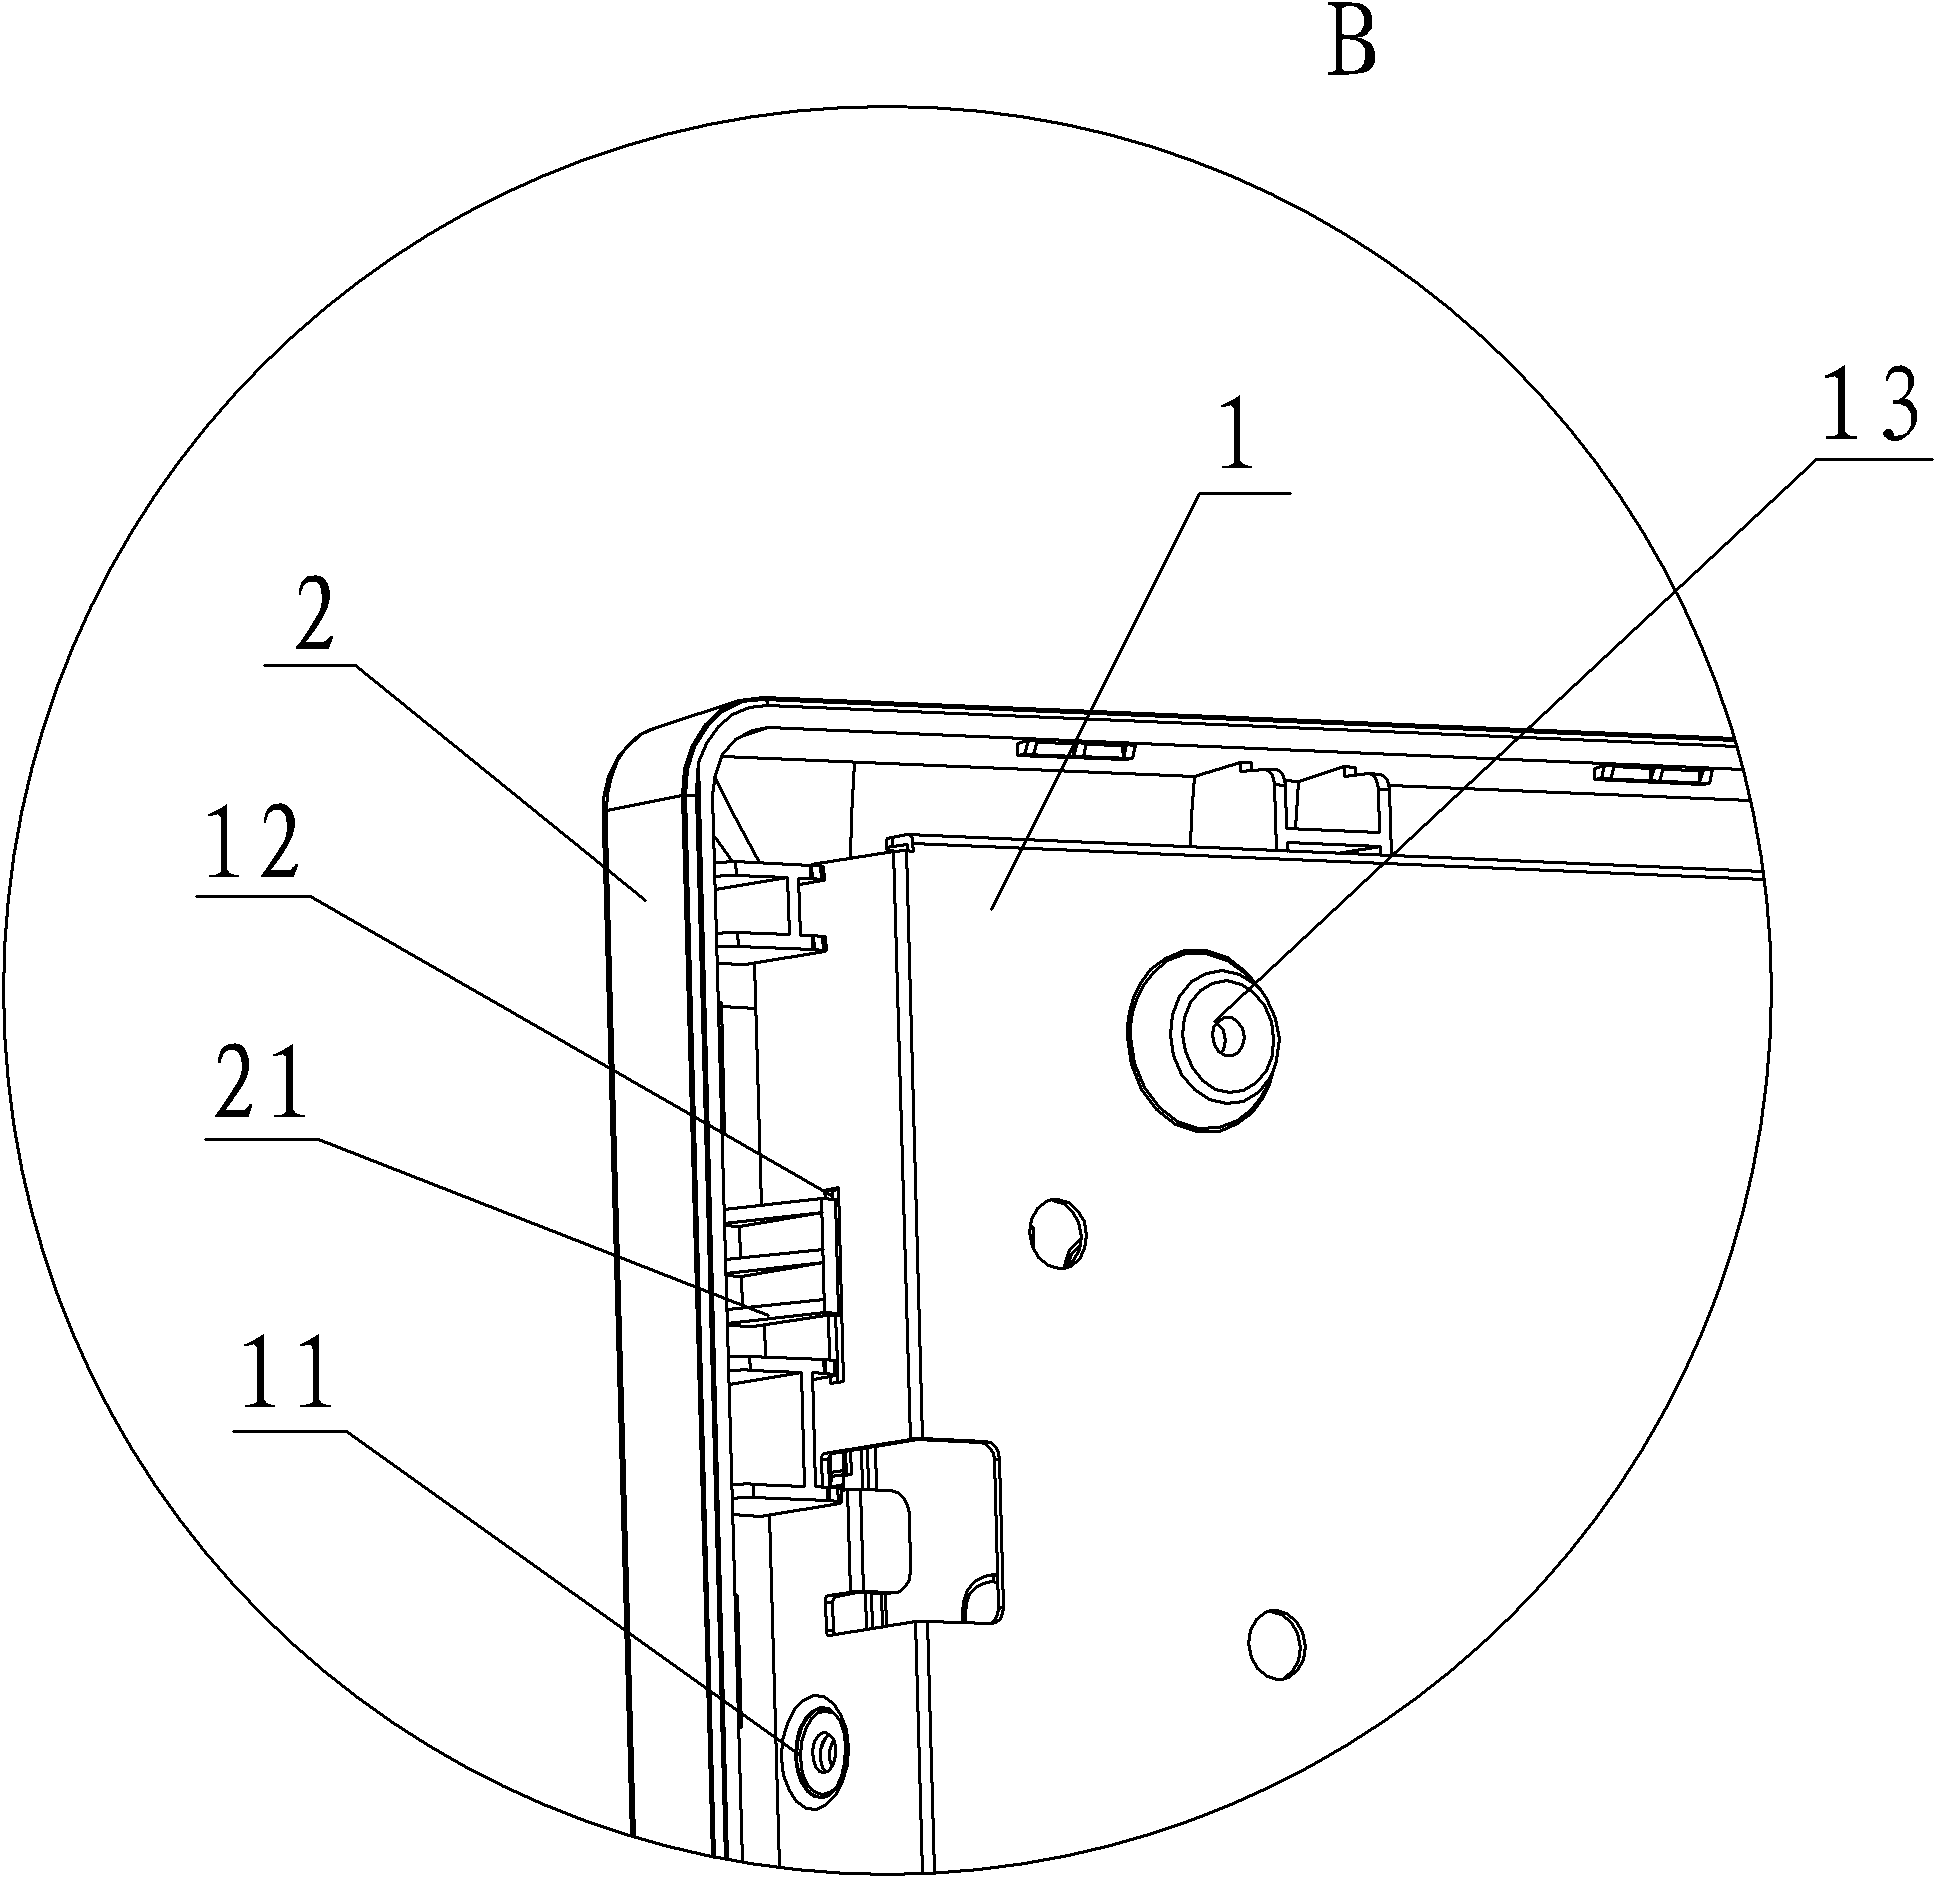 Display equipment and assembling method thereof as well as fixed bracket for display equipment